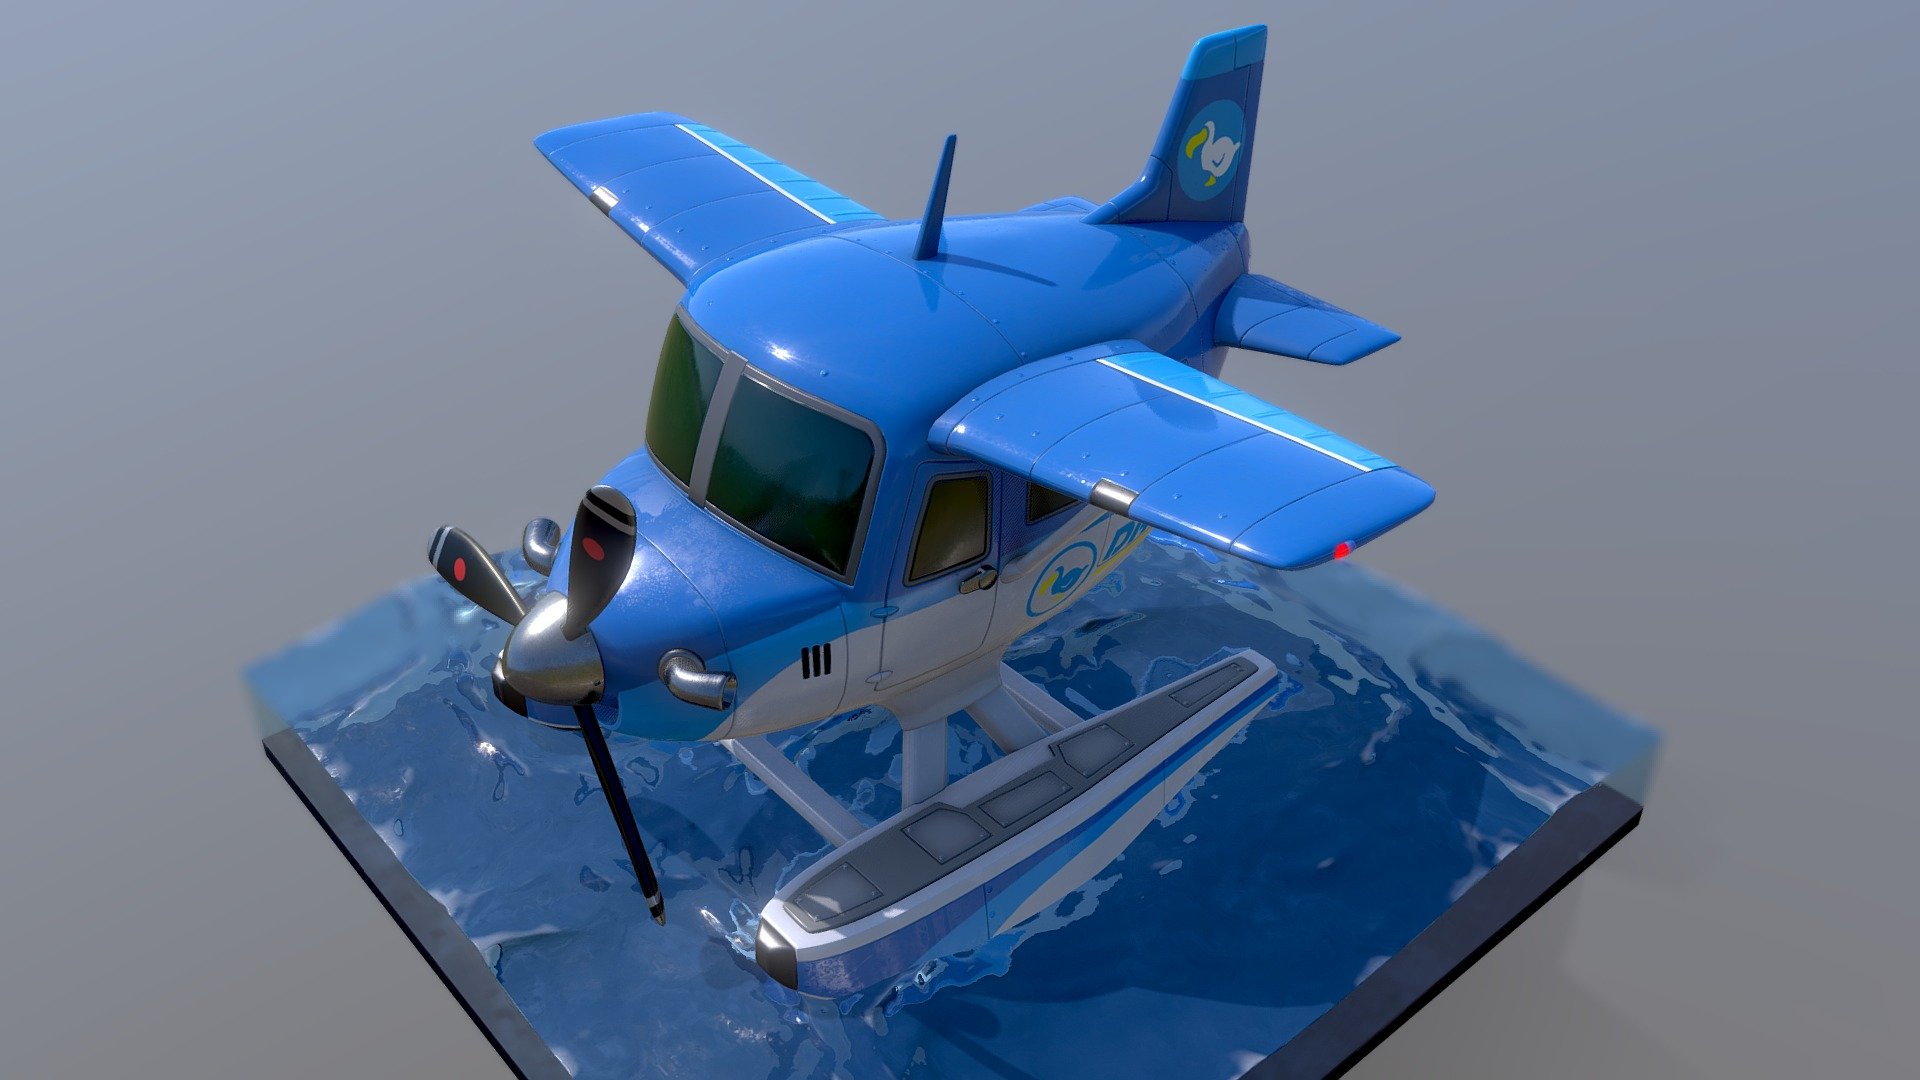 A fanart,Modeling in blender,texture in substance.
I love this sooo cute plane :0 - Animal Crossing Seaplane - 3D model by winotmk 3d model